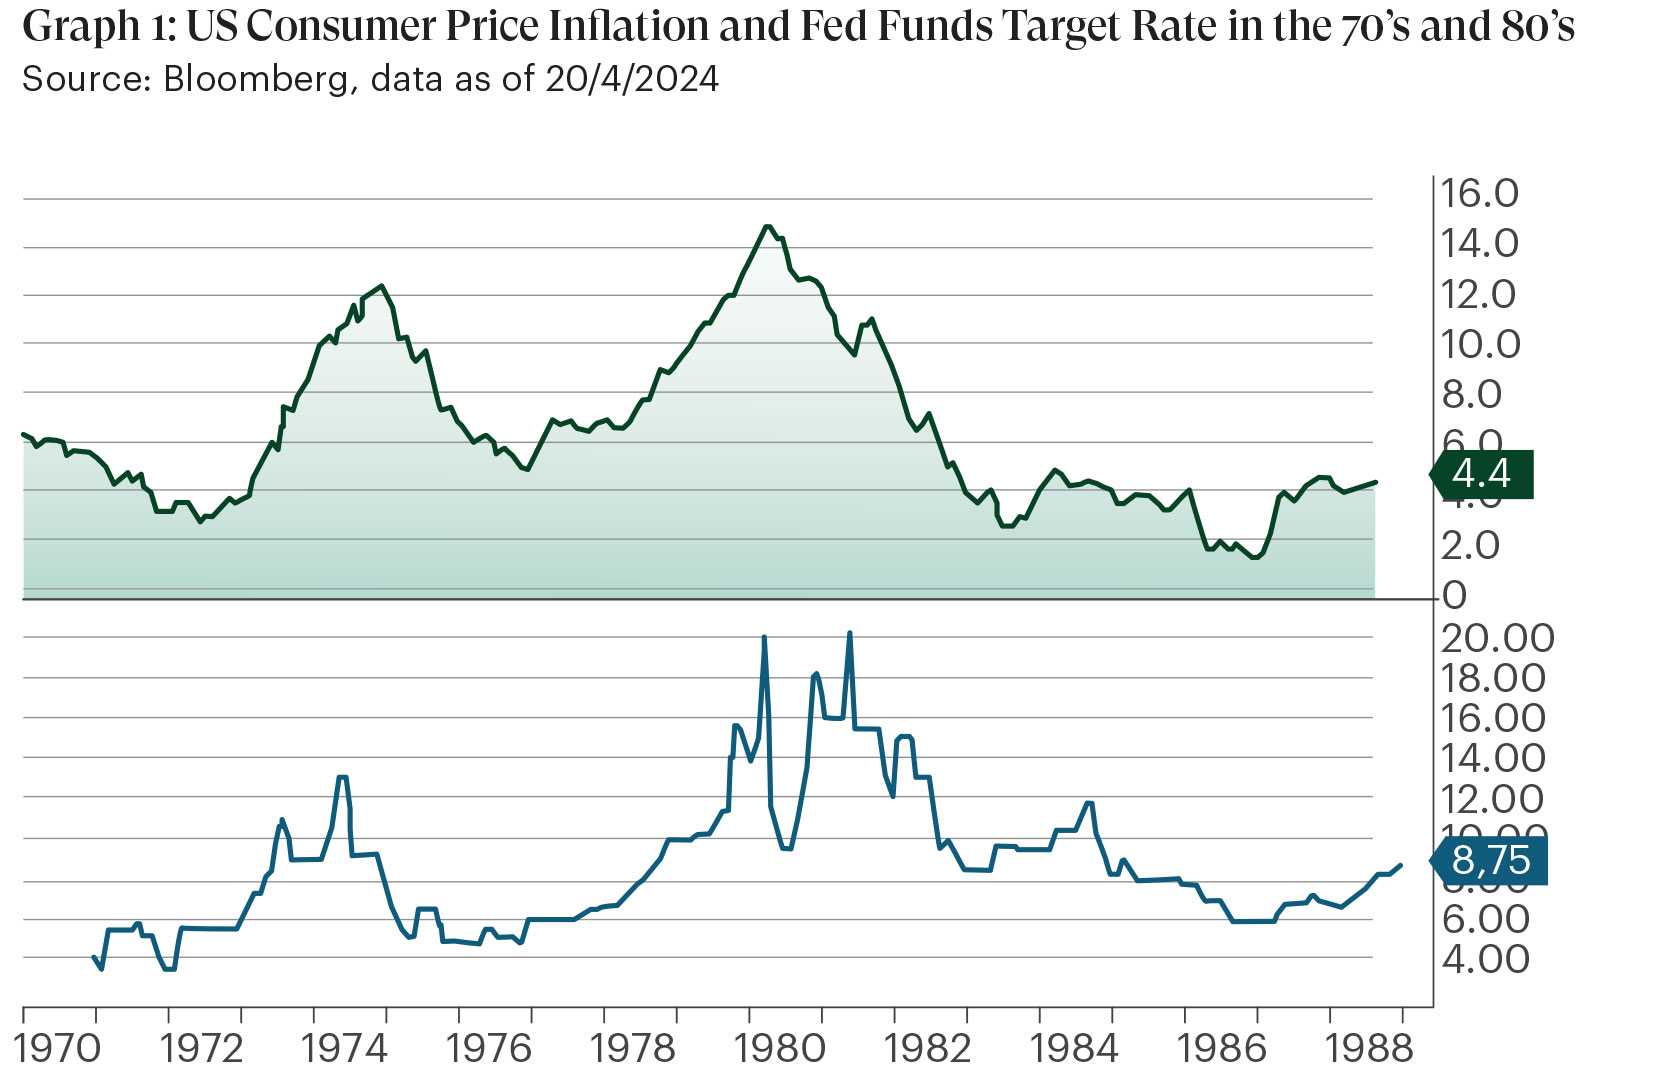 US Consumer Price Inflation and Fed Funds Target Rate in the 70’s and 80’s